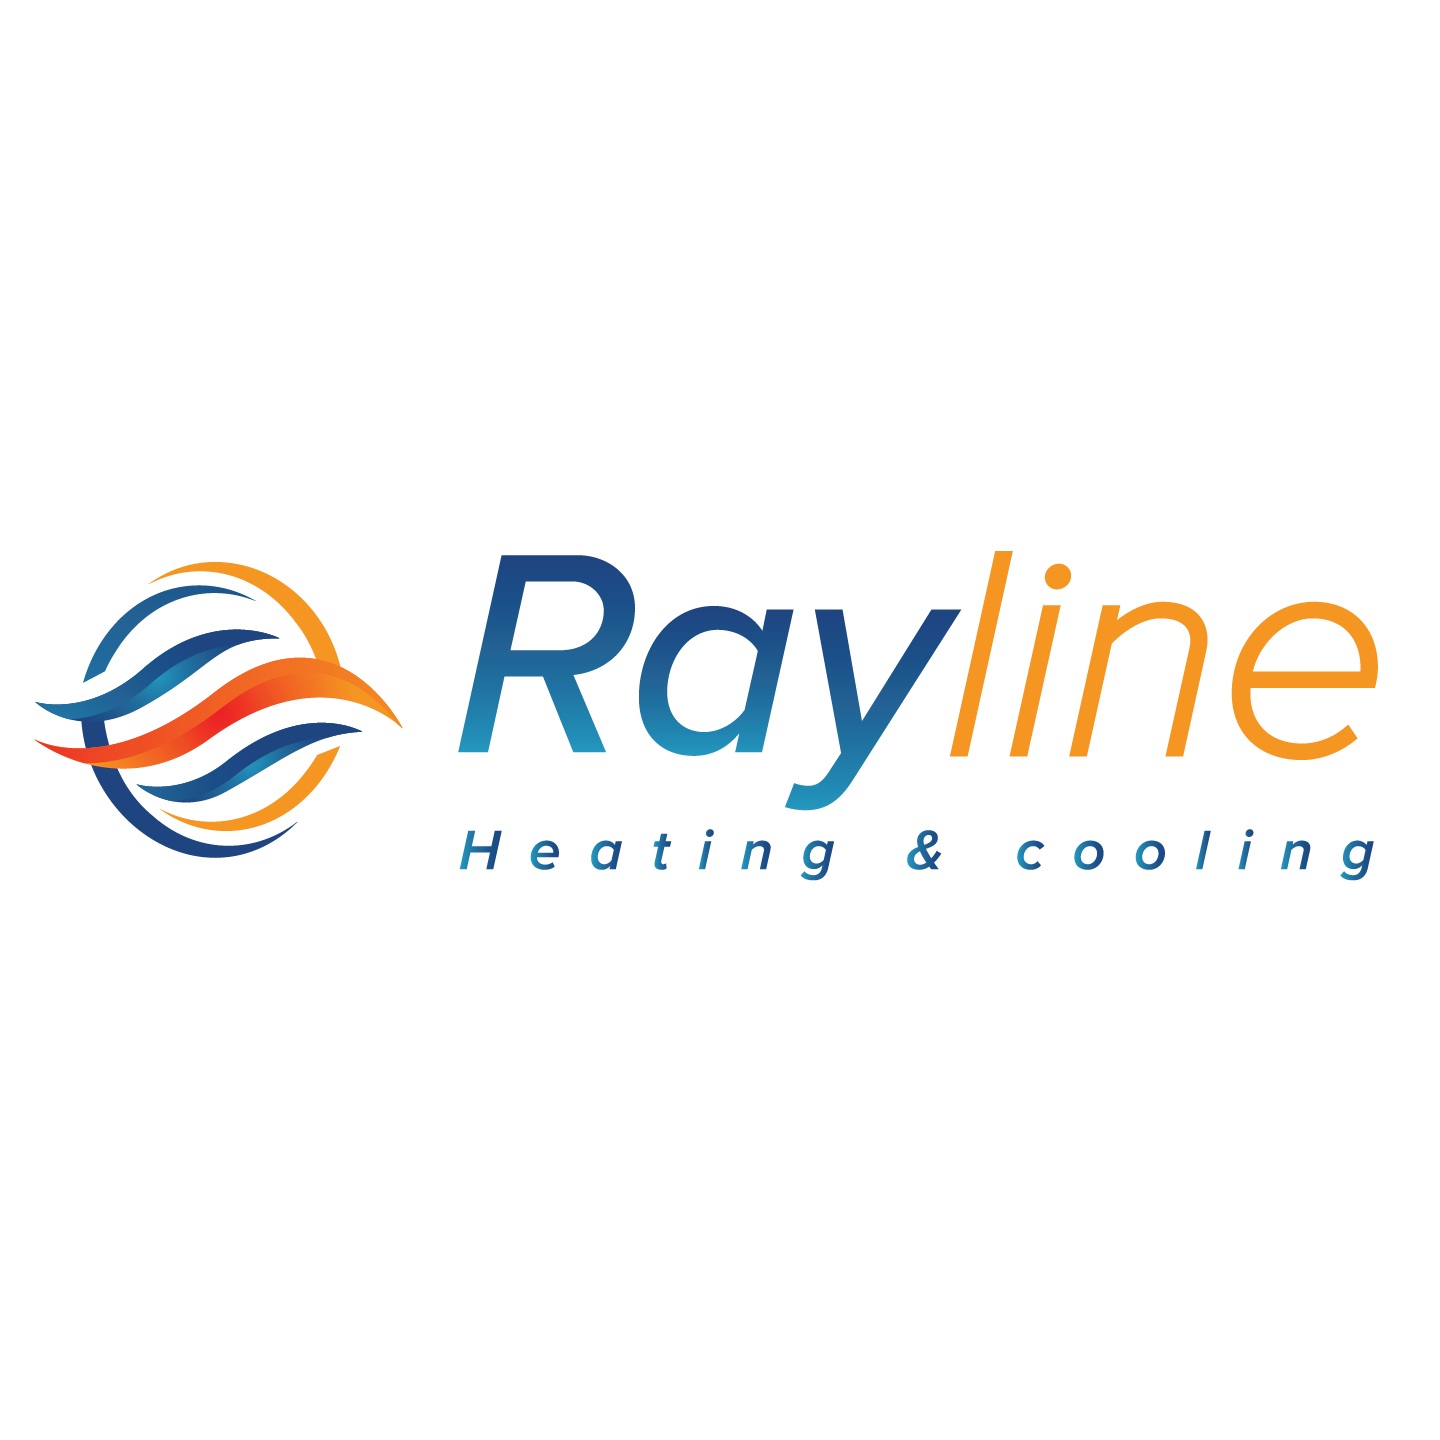 Rayline Heating and Cooling